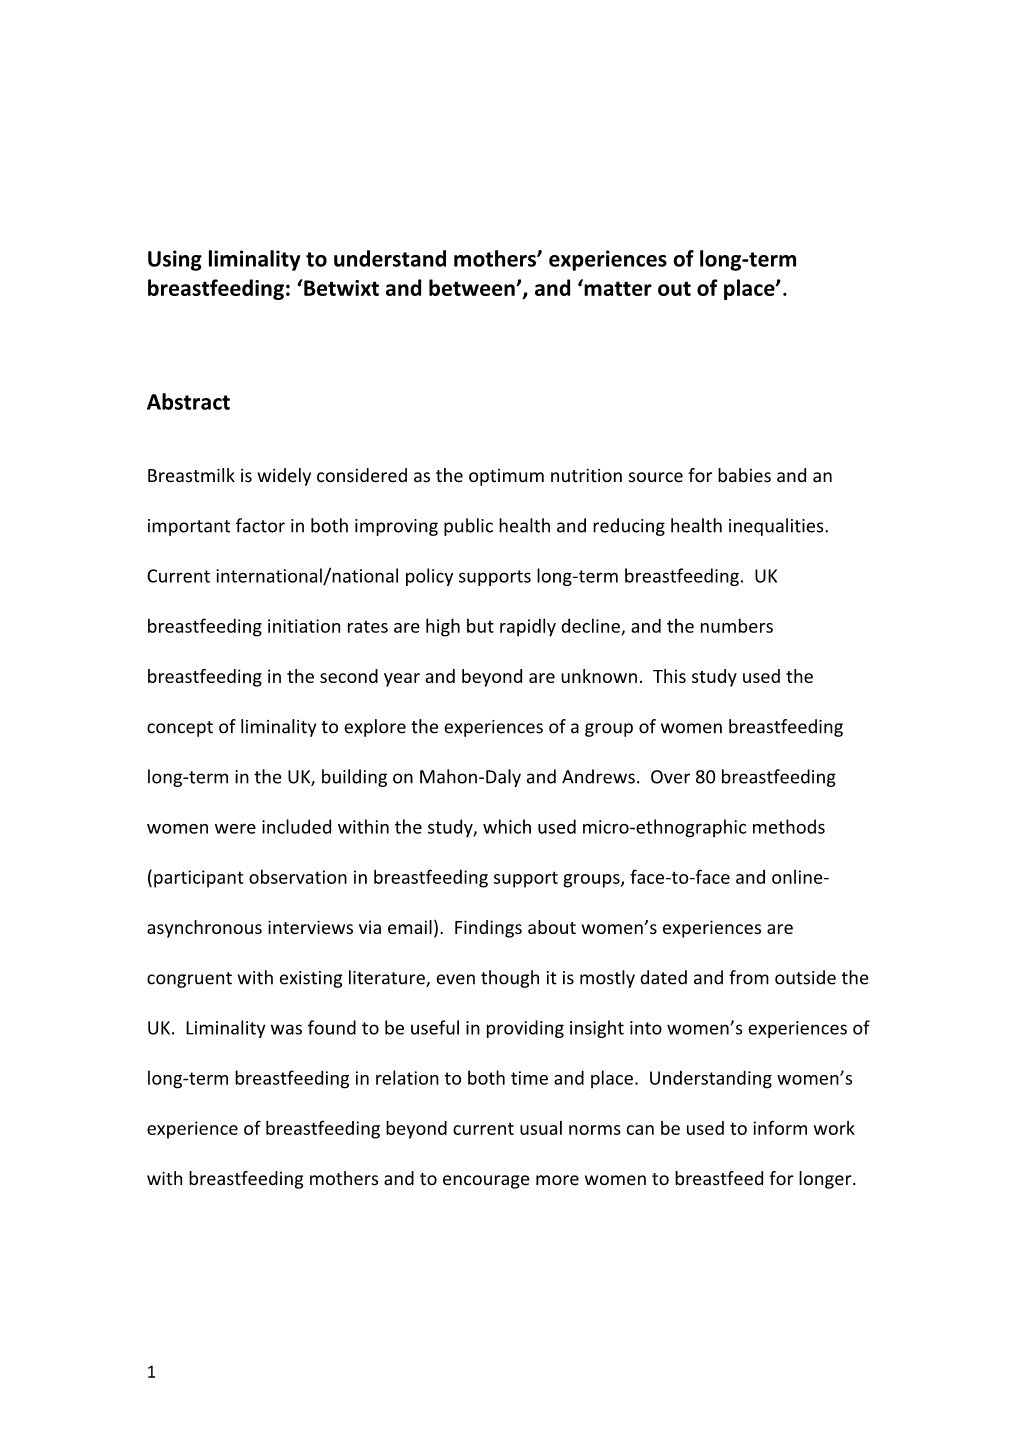 Using Liminality to Understand Mothers Experiences of Long-Term Breastfeeding: Betwixt